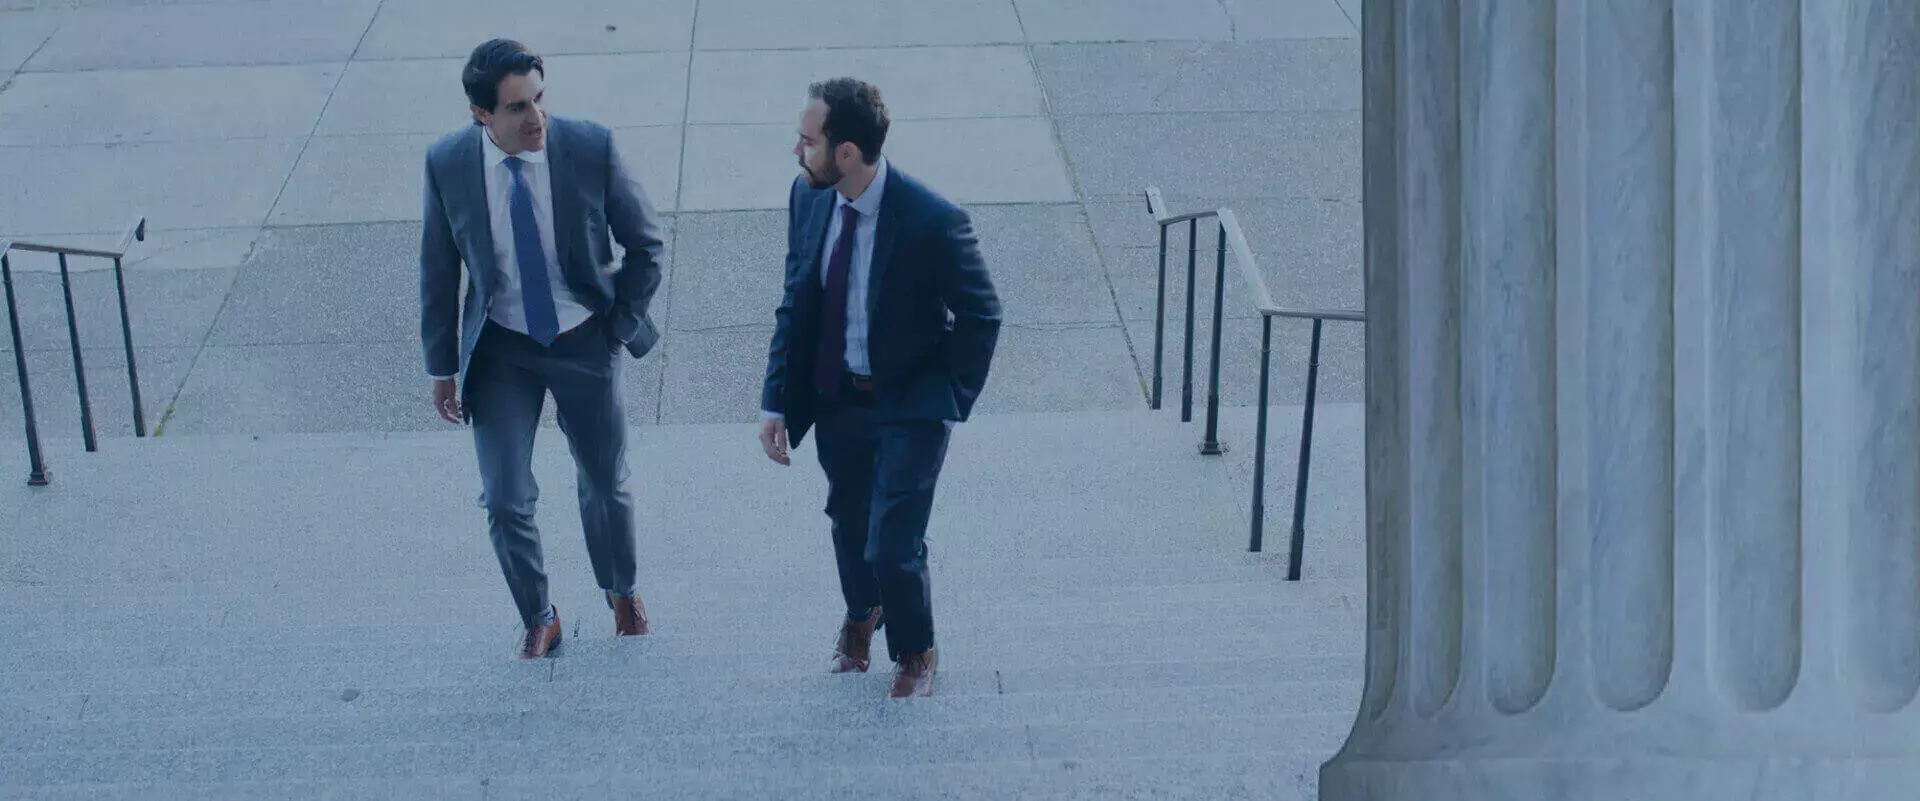 Two lawyers walking in the stairs